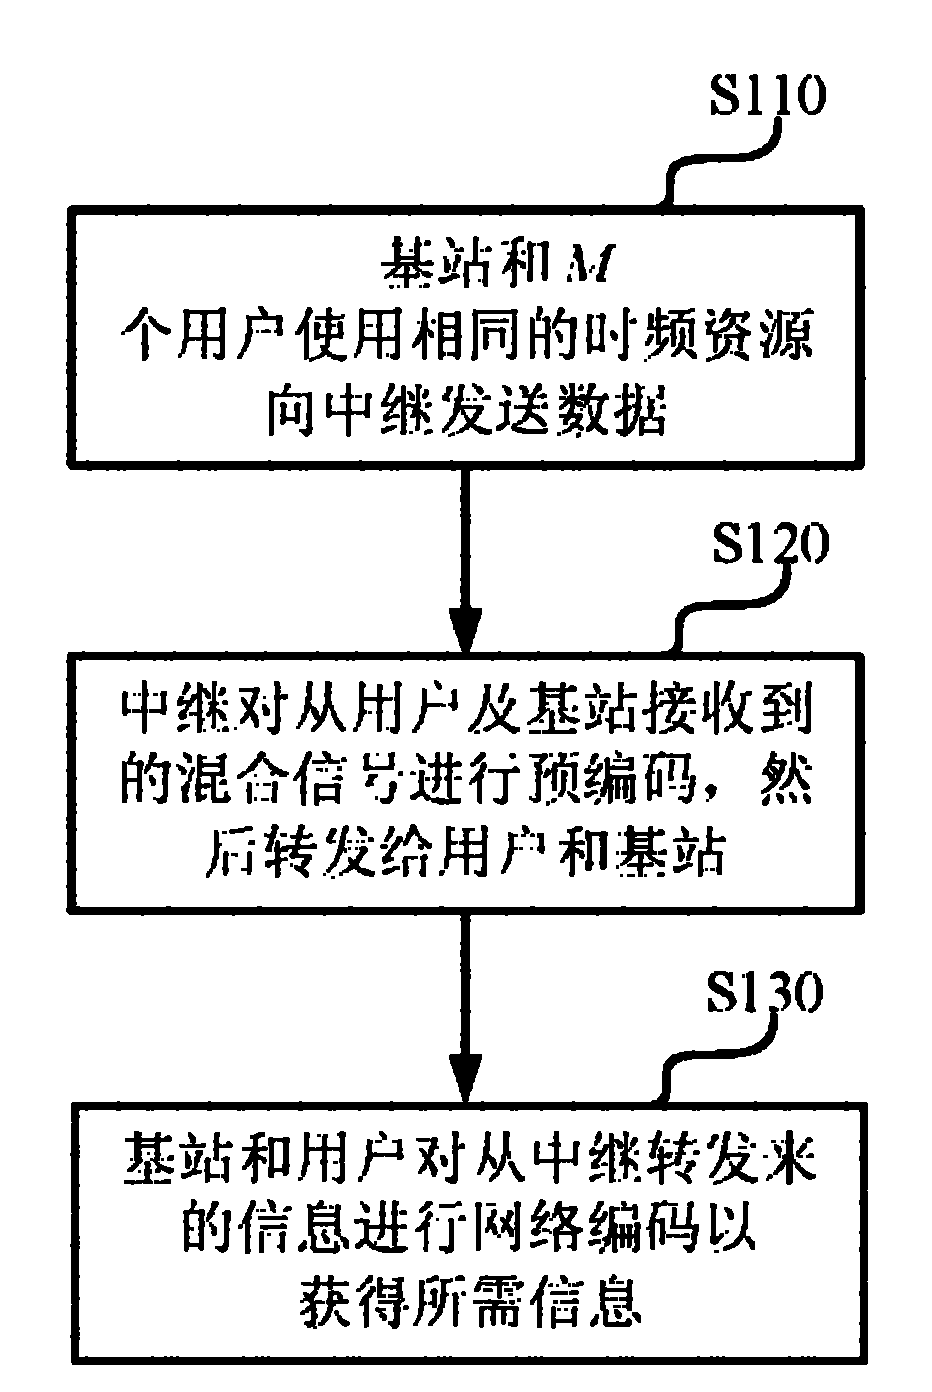 User scheduling method of wireless bidirectional trunk network coding system